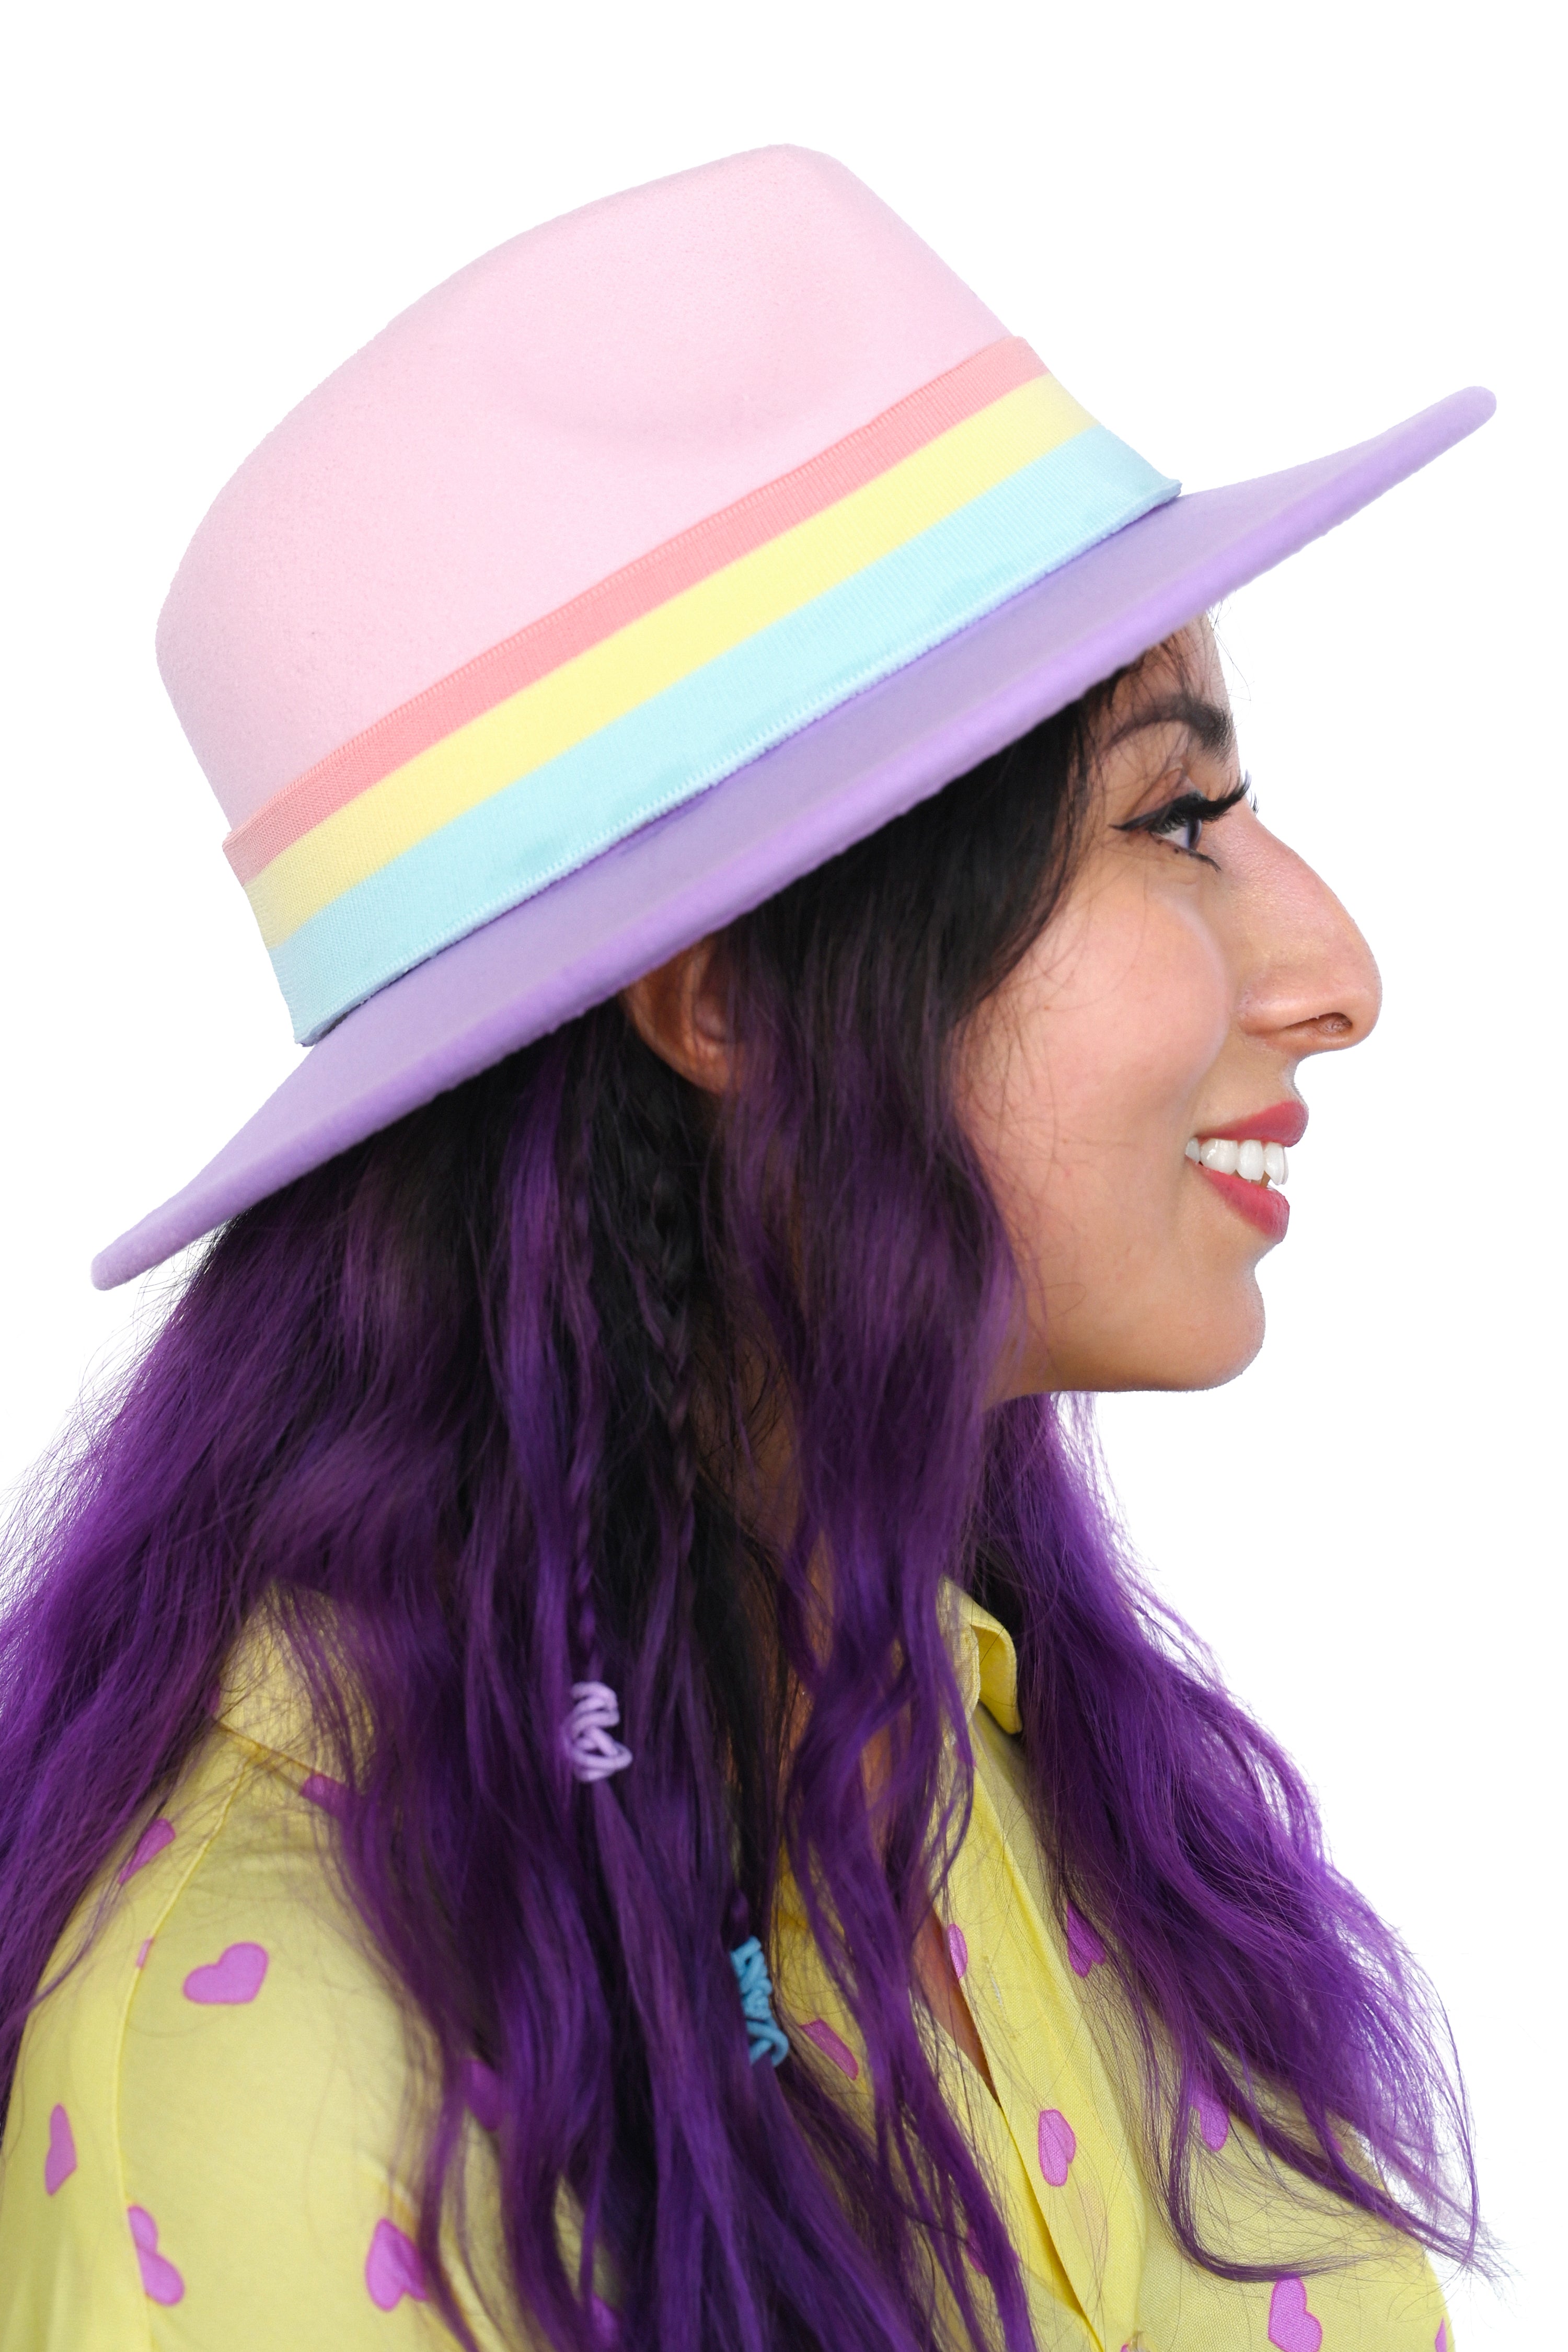 Hard brim hat with baby-pink crown and lavender brim,  and a striped rainbow hat band.